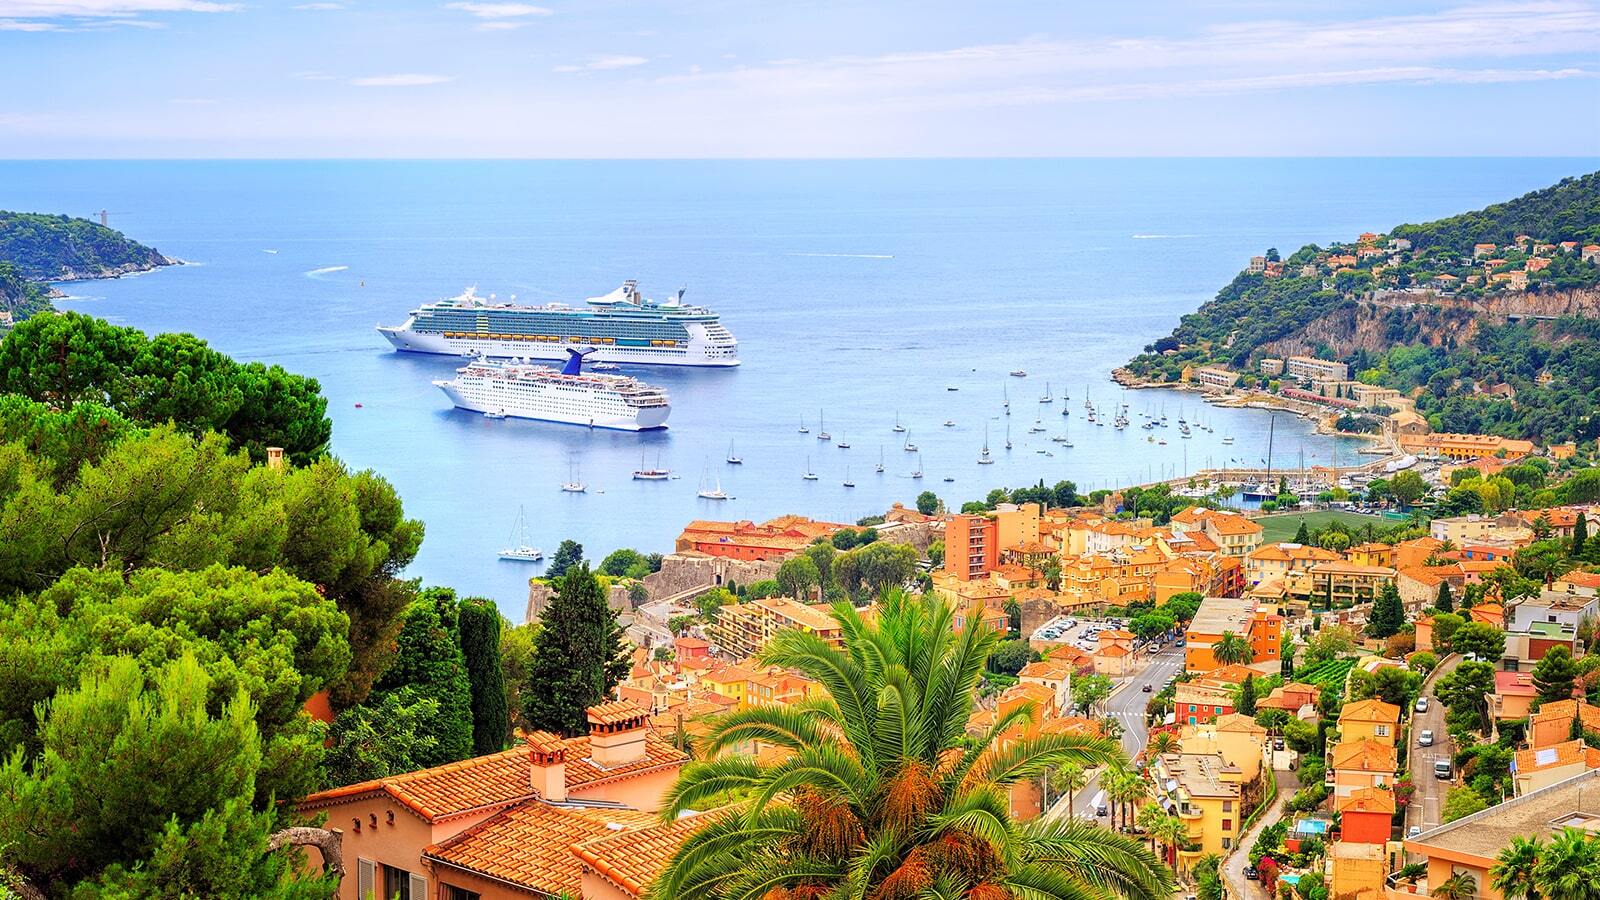 Start your Mediterranean cruise holiday from the UK. Credit: Shutterstock